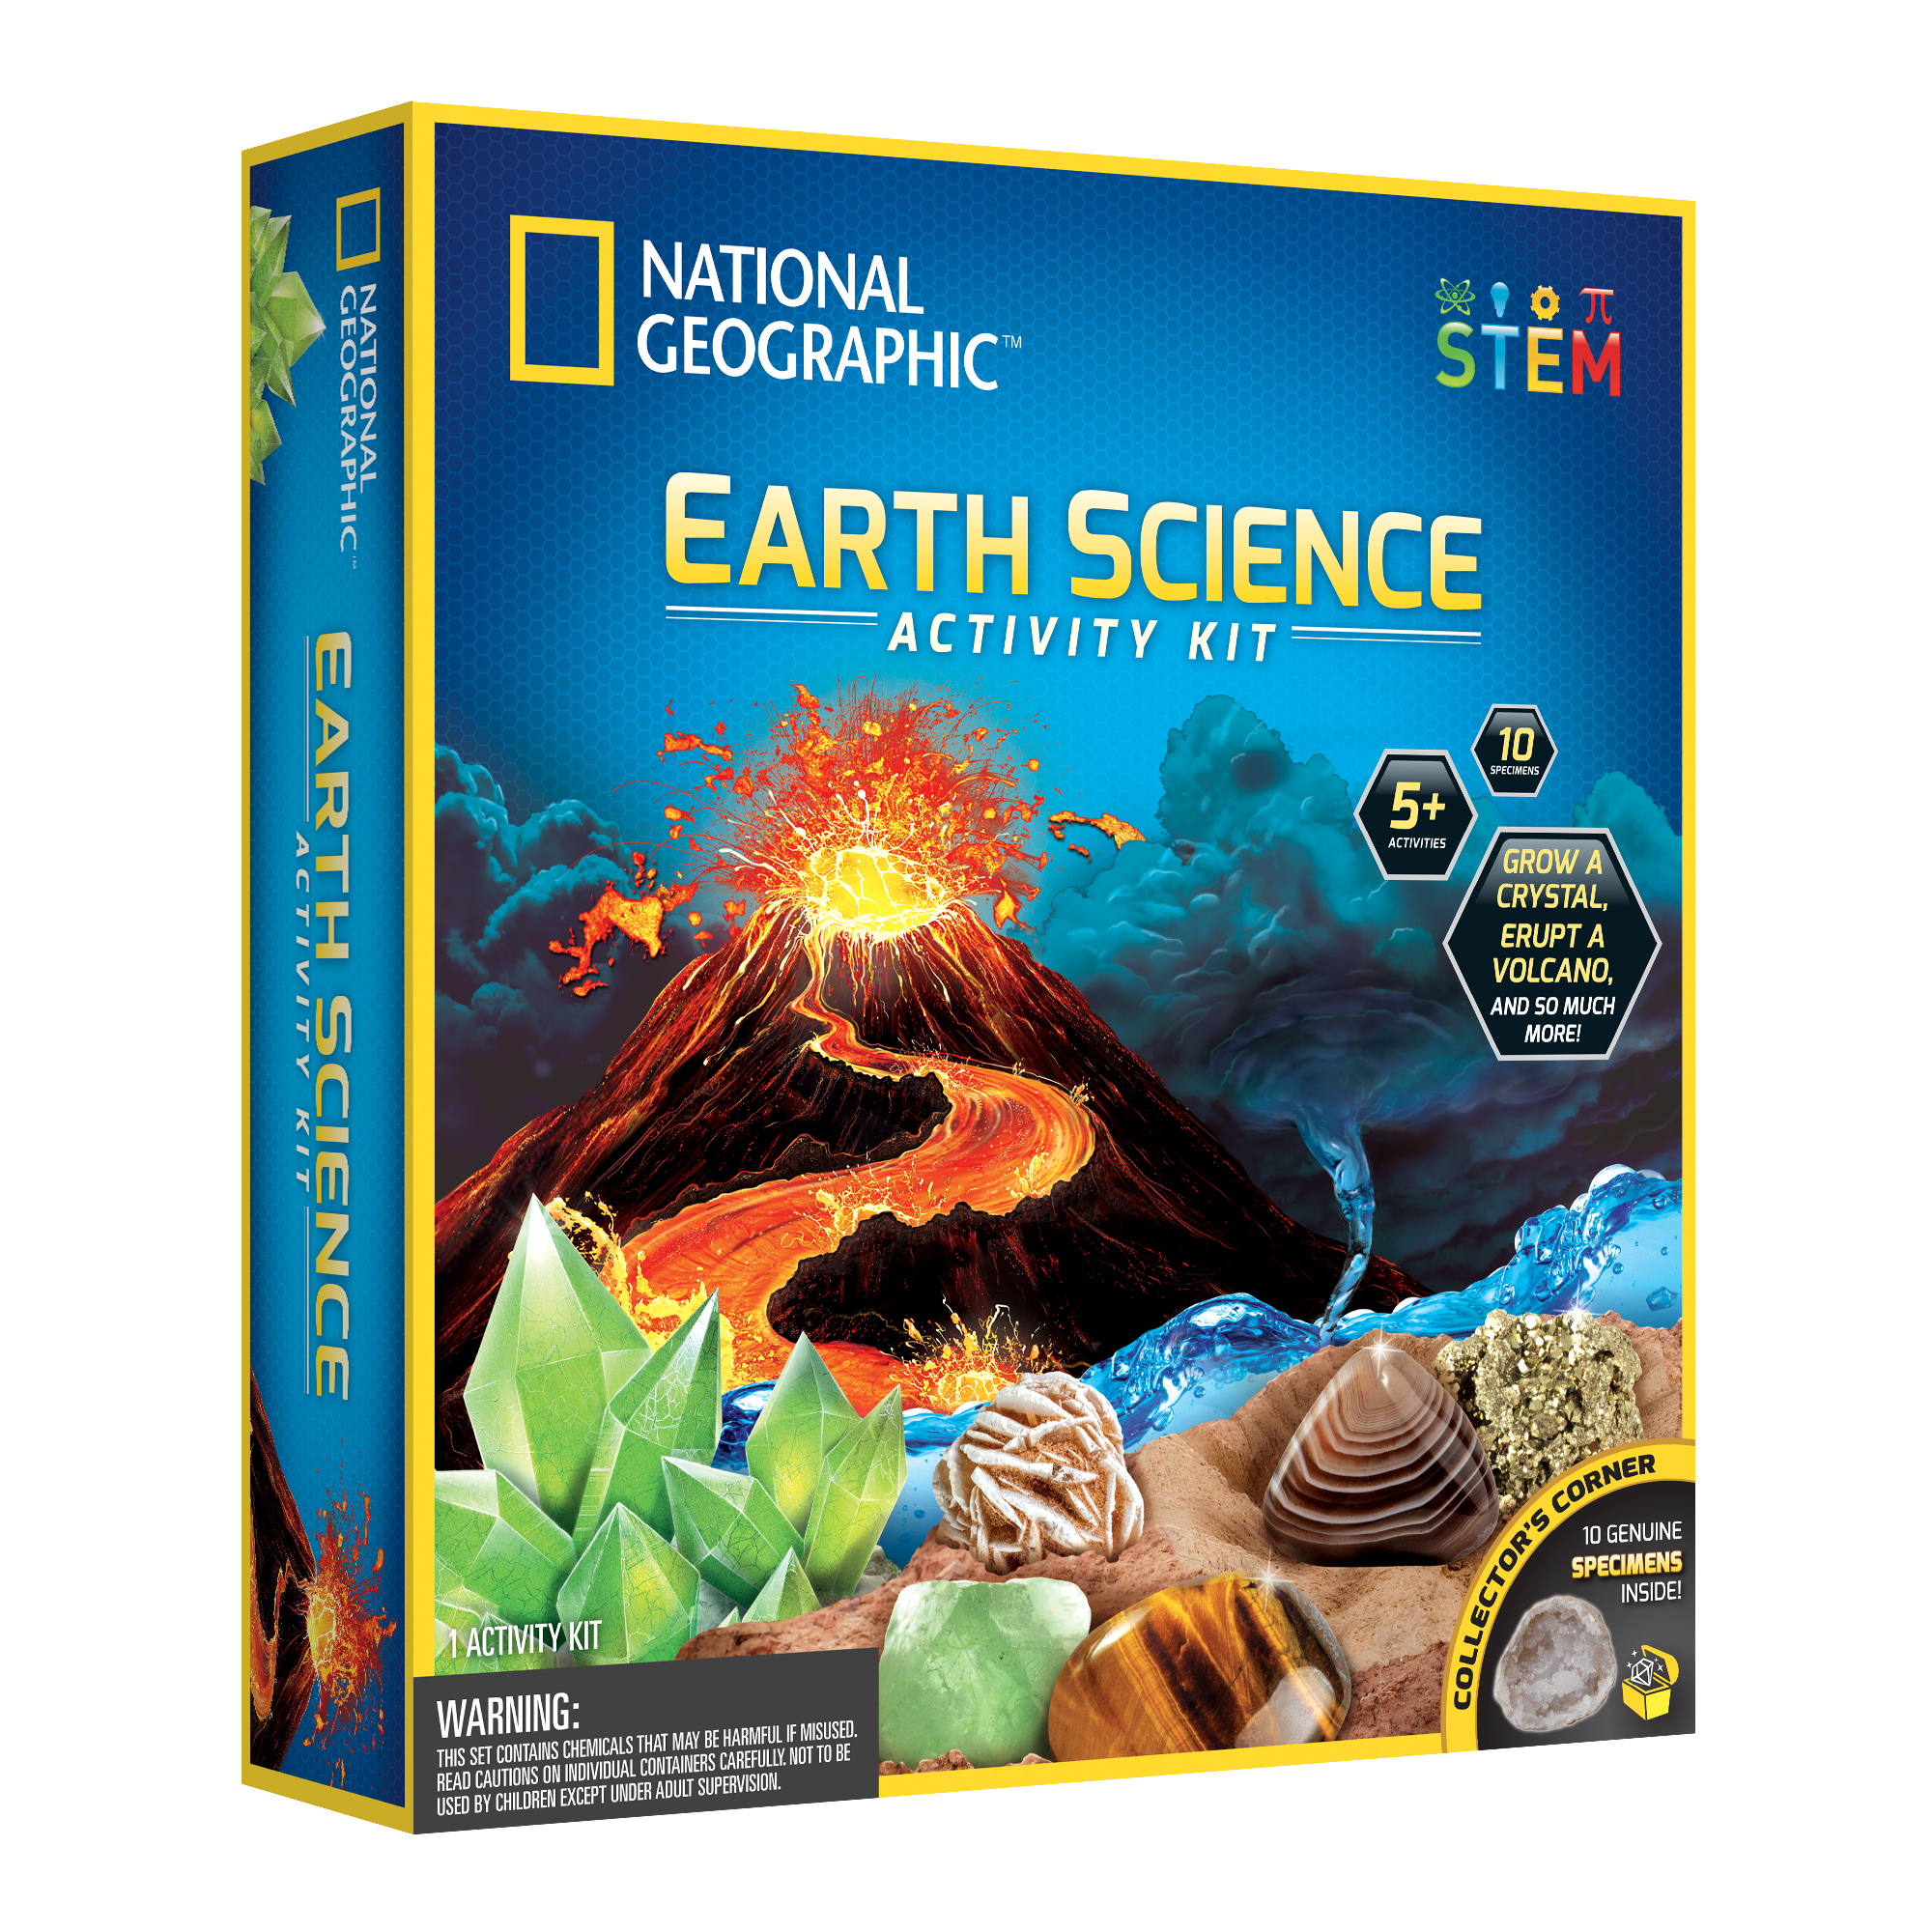 National Geographic Earth Science Activity Kit with STEM Experiments for Children 8 Years and up - image 1 of 6